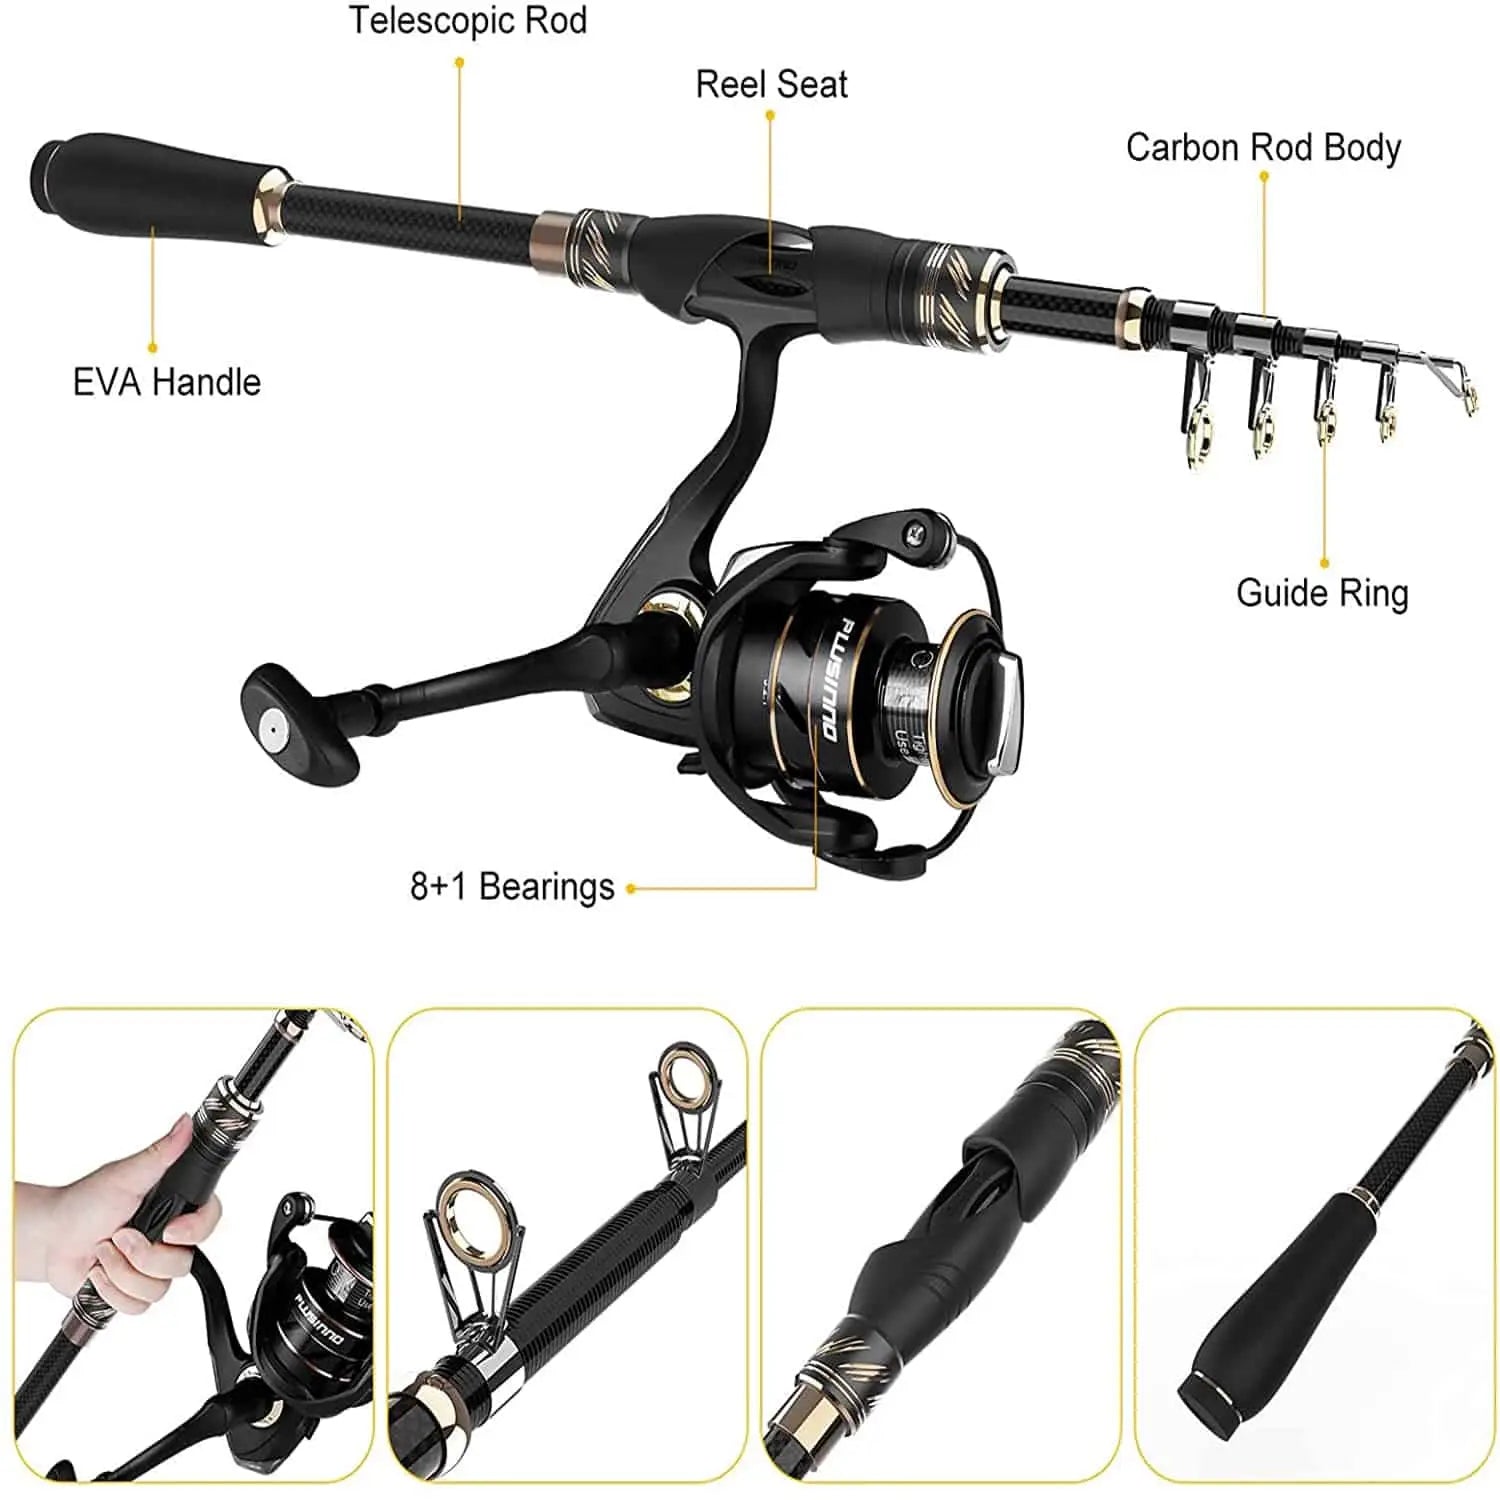 PLUSINNO Telescopic Fishing Rod and Reel Combos with Kuwait